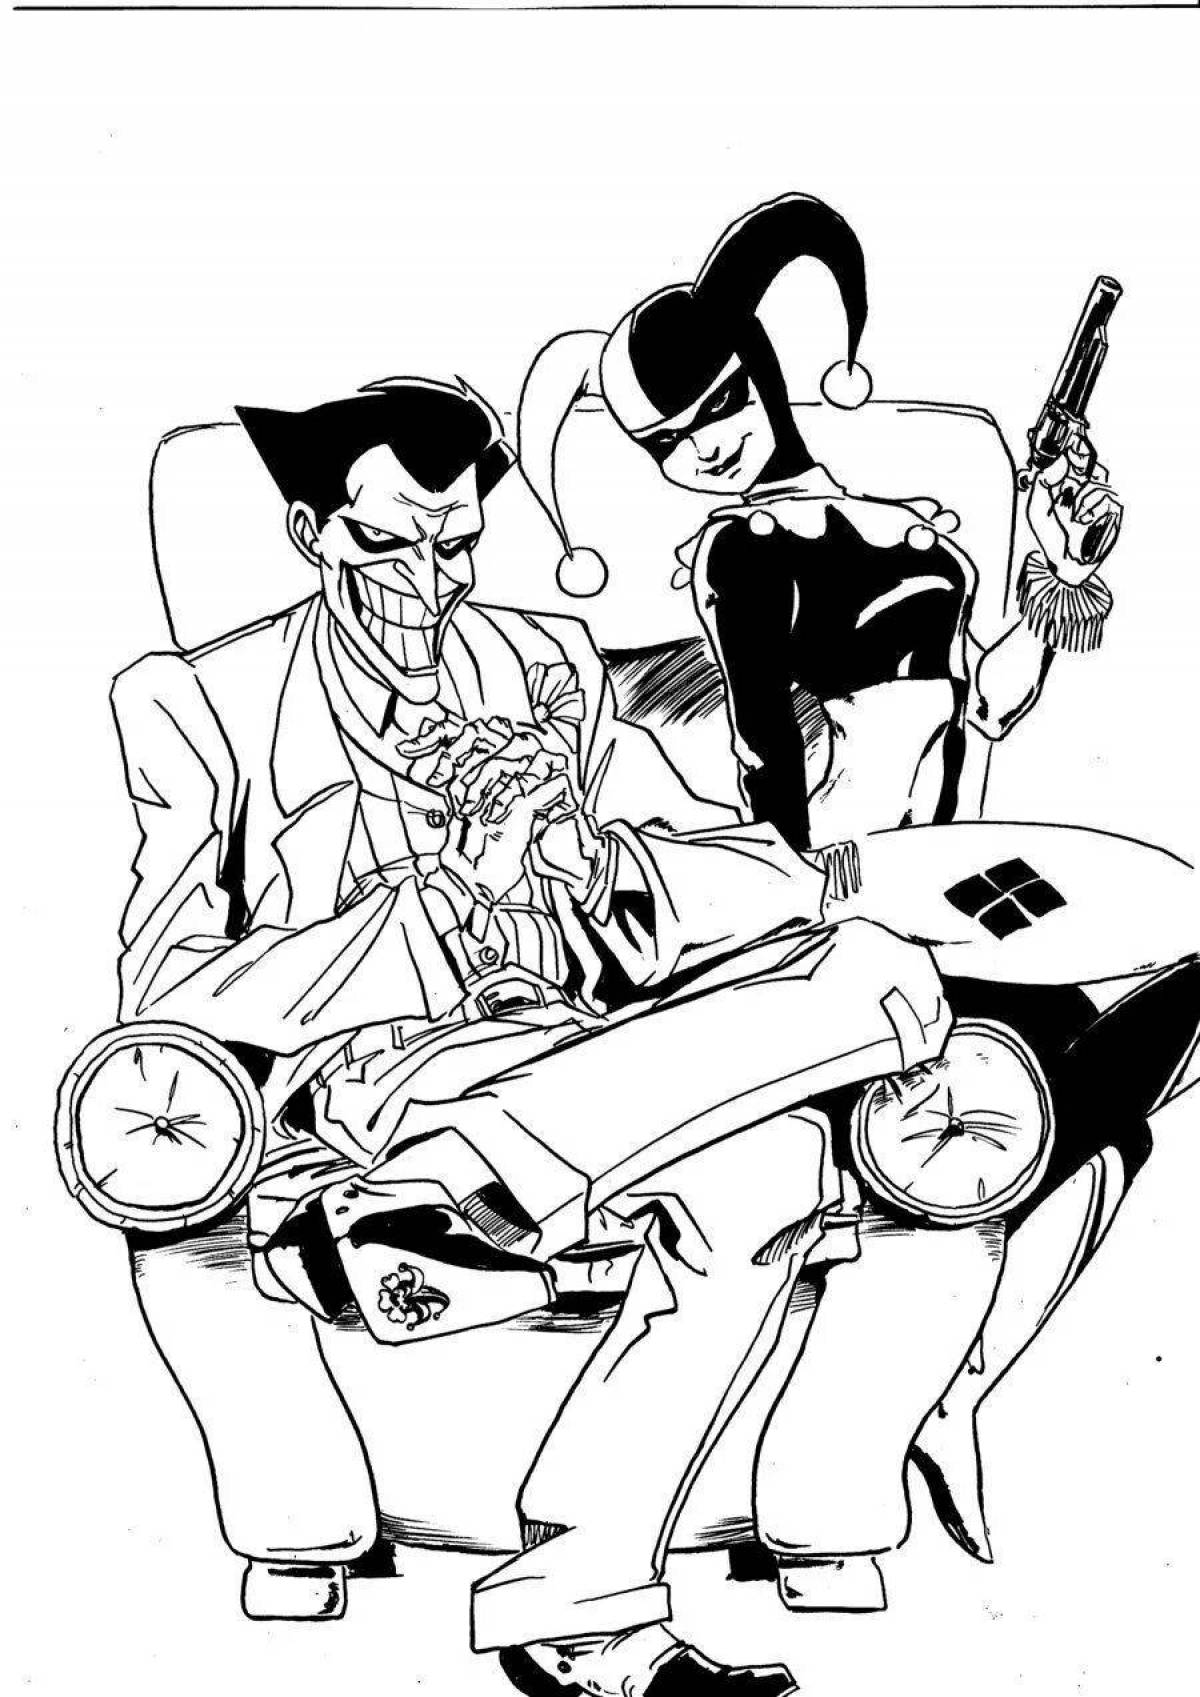 Colorful joker and harley quinn coloring book